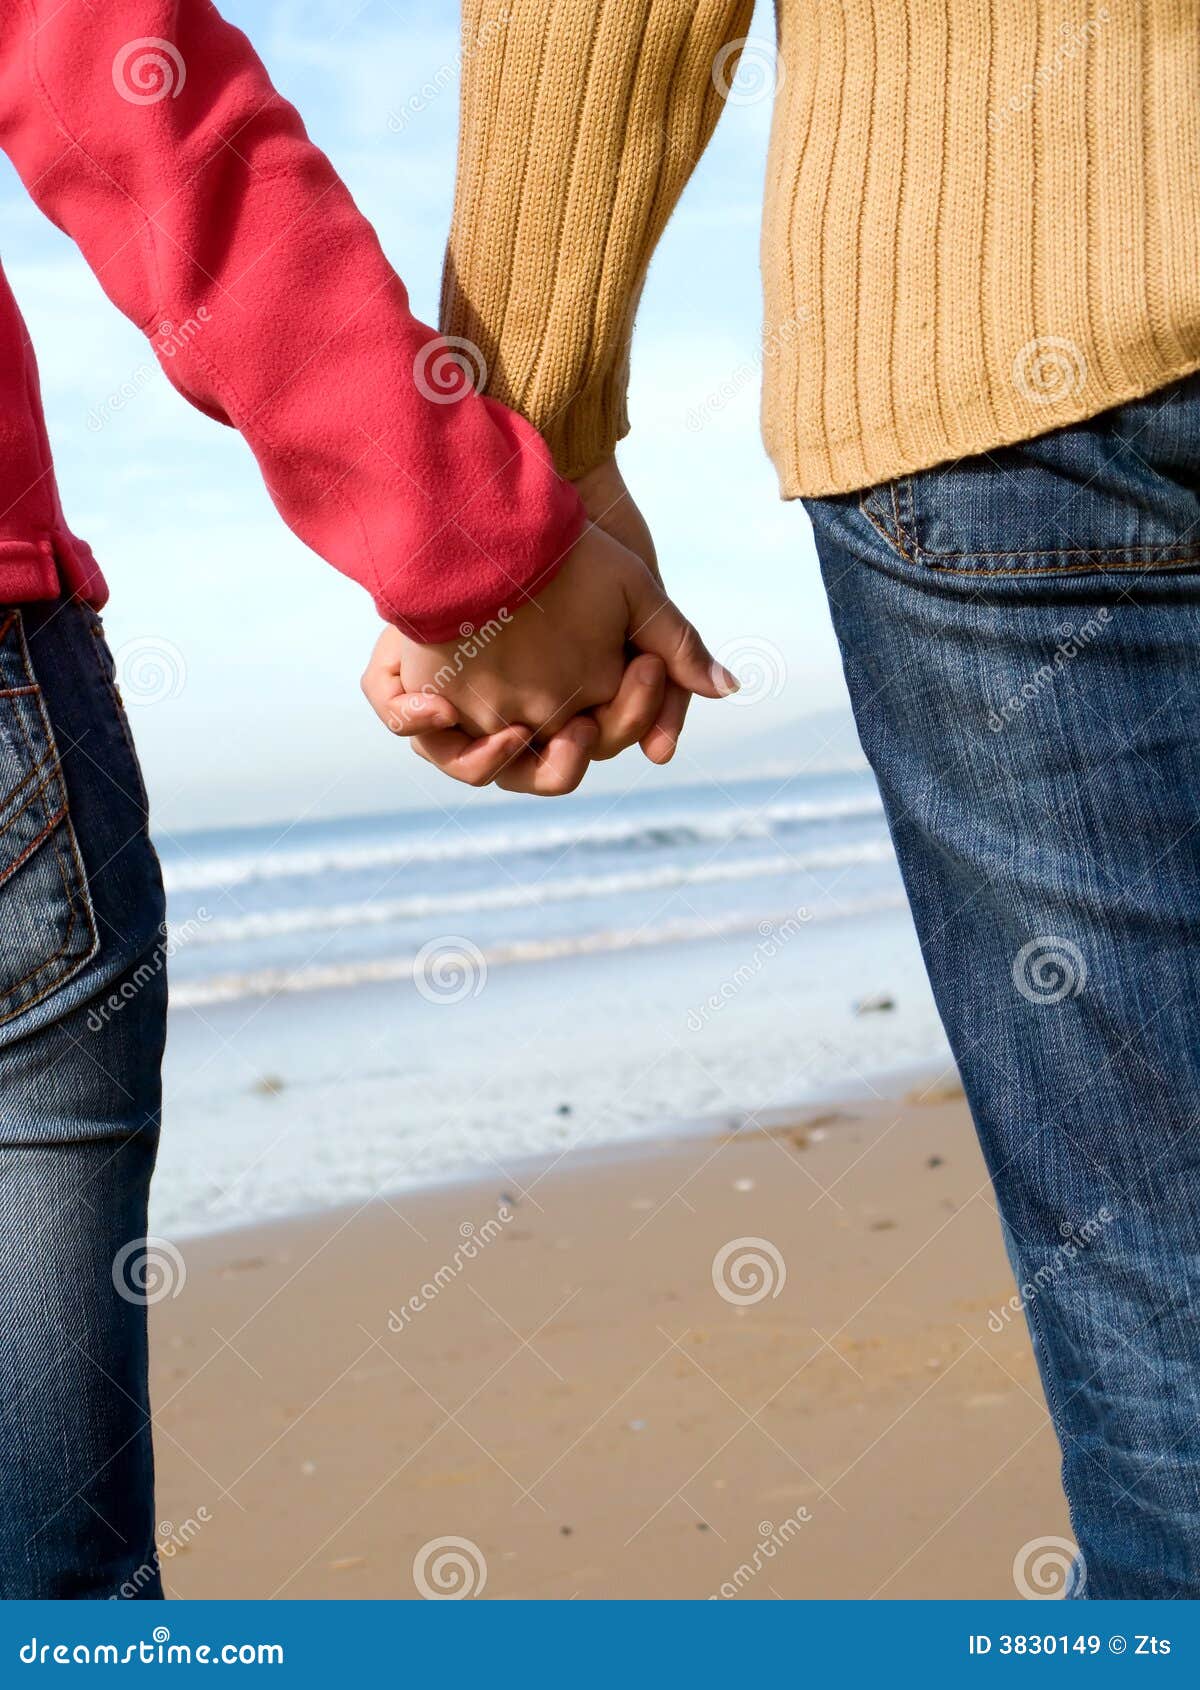 Lovers couple holding hands on beach at winter